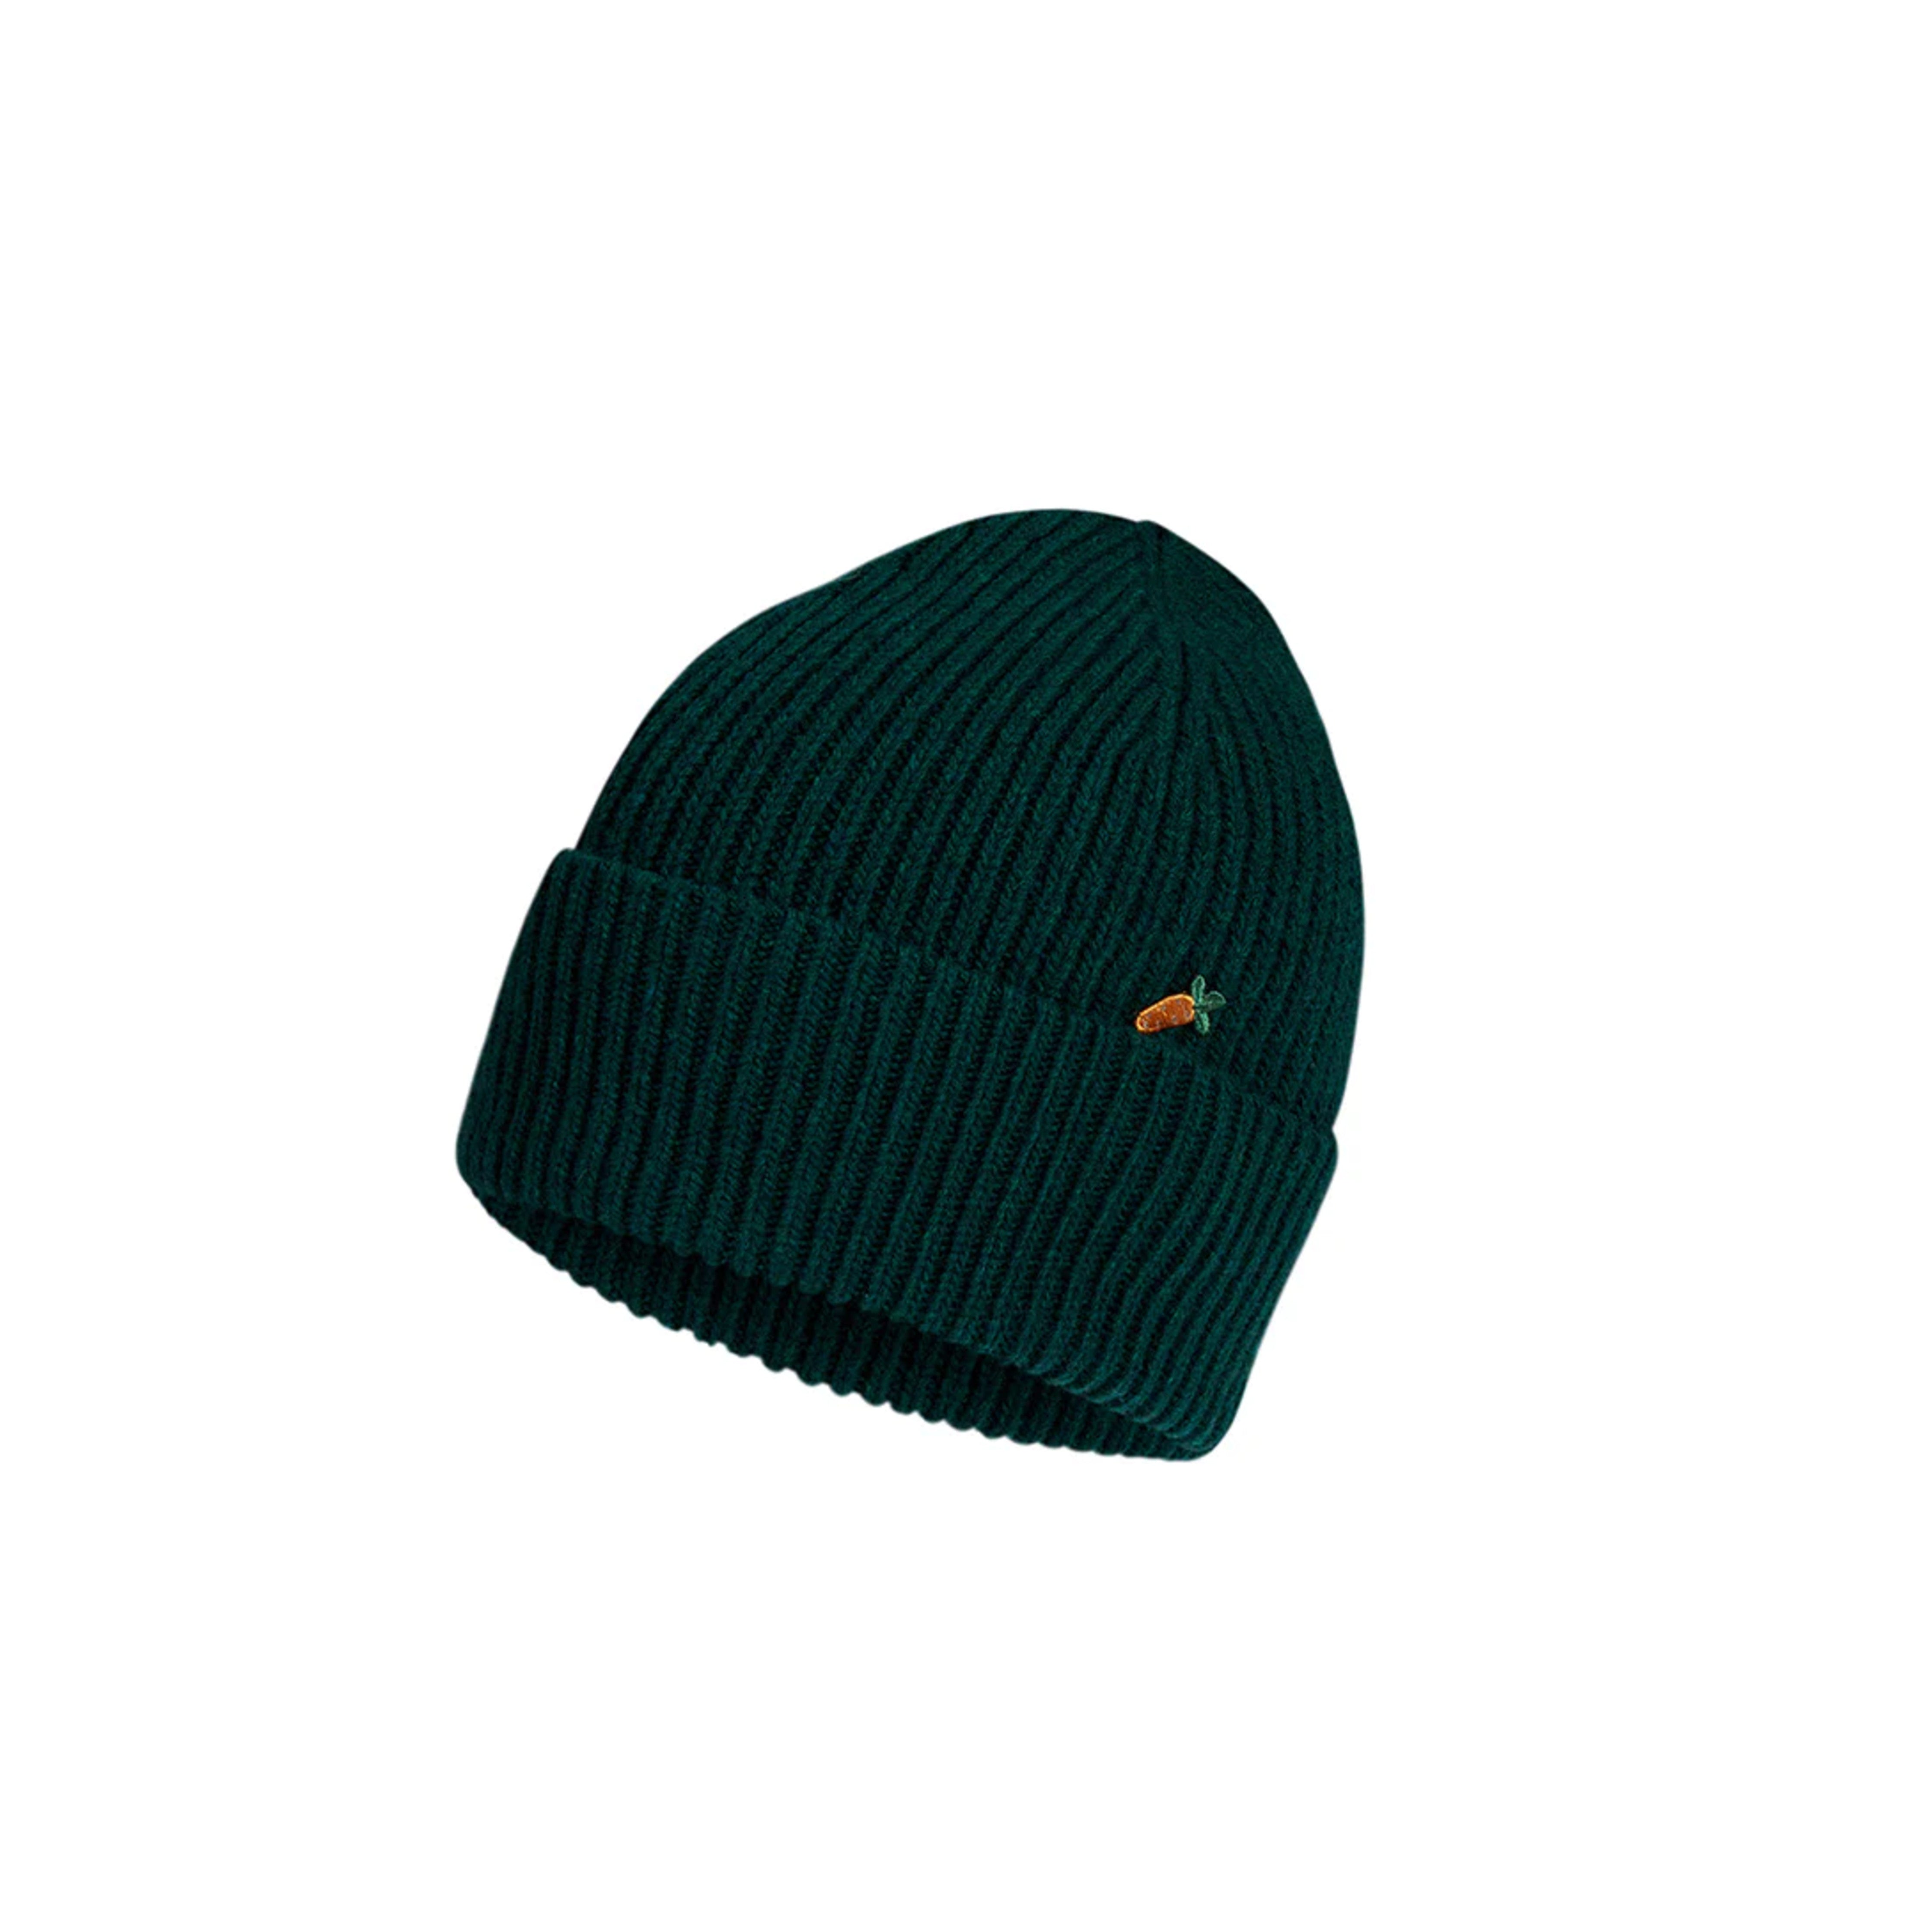 Get the Gallop Carrot Cashmere Beanie